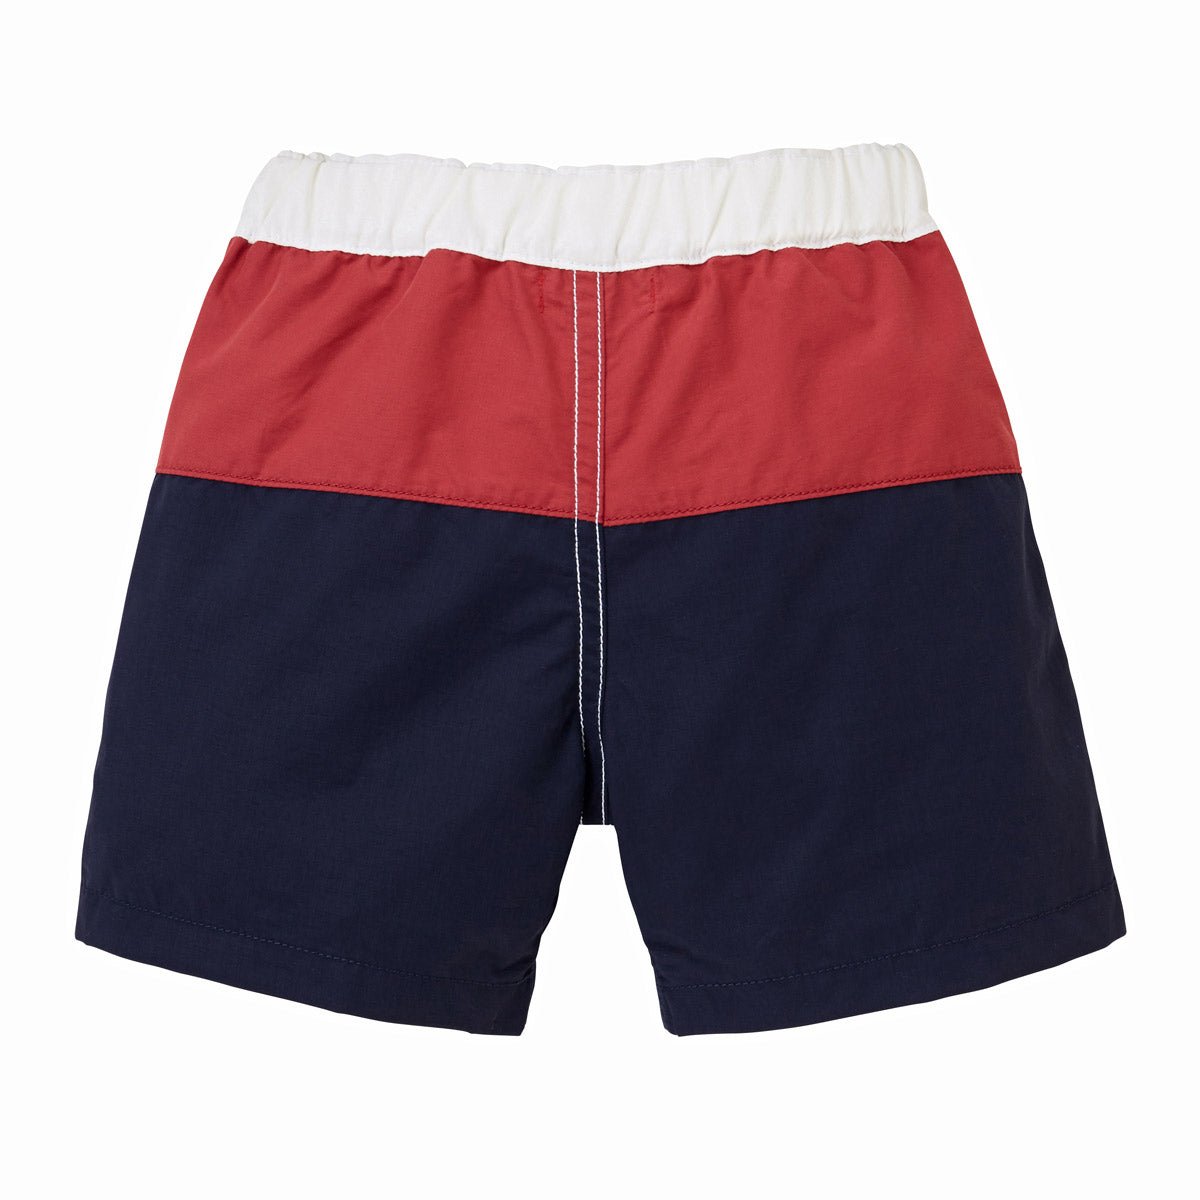 DOUBLE_B Water Repellent Shorts - 62-3102-385-03-90